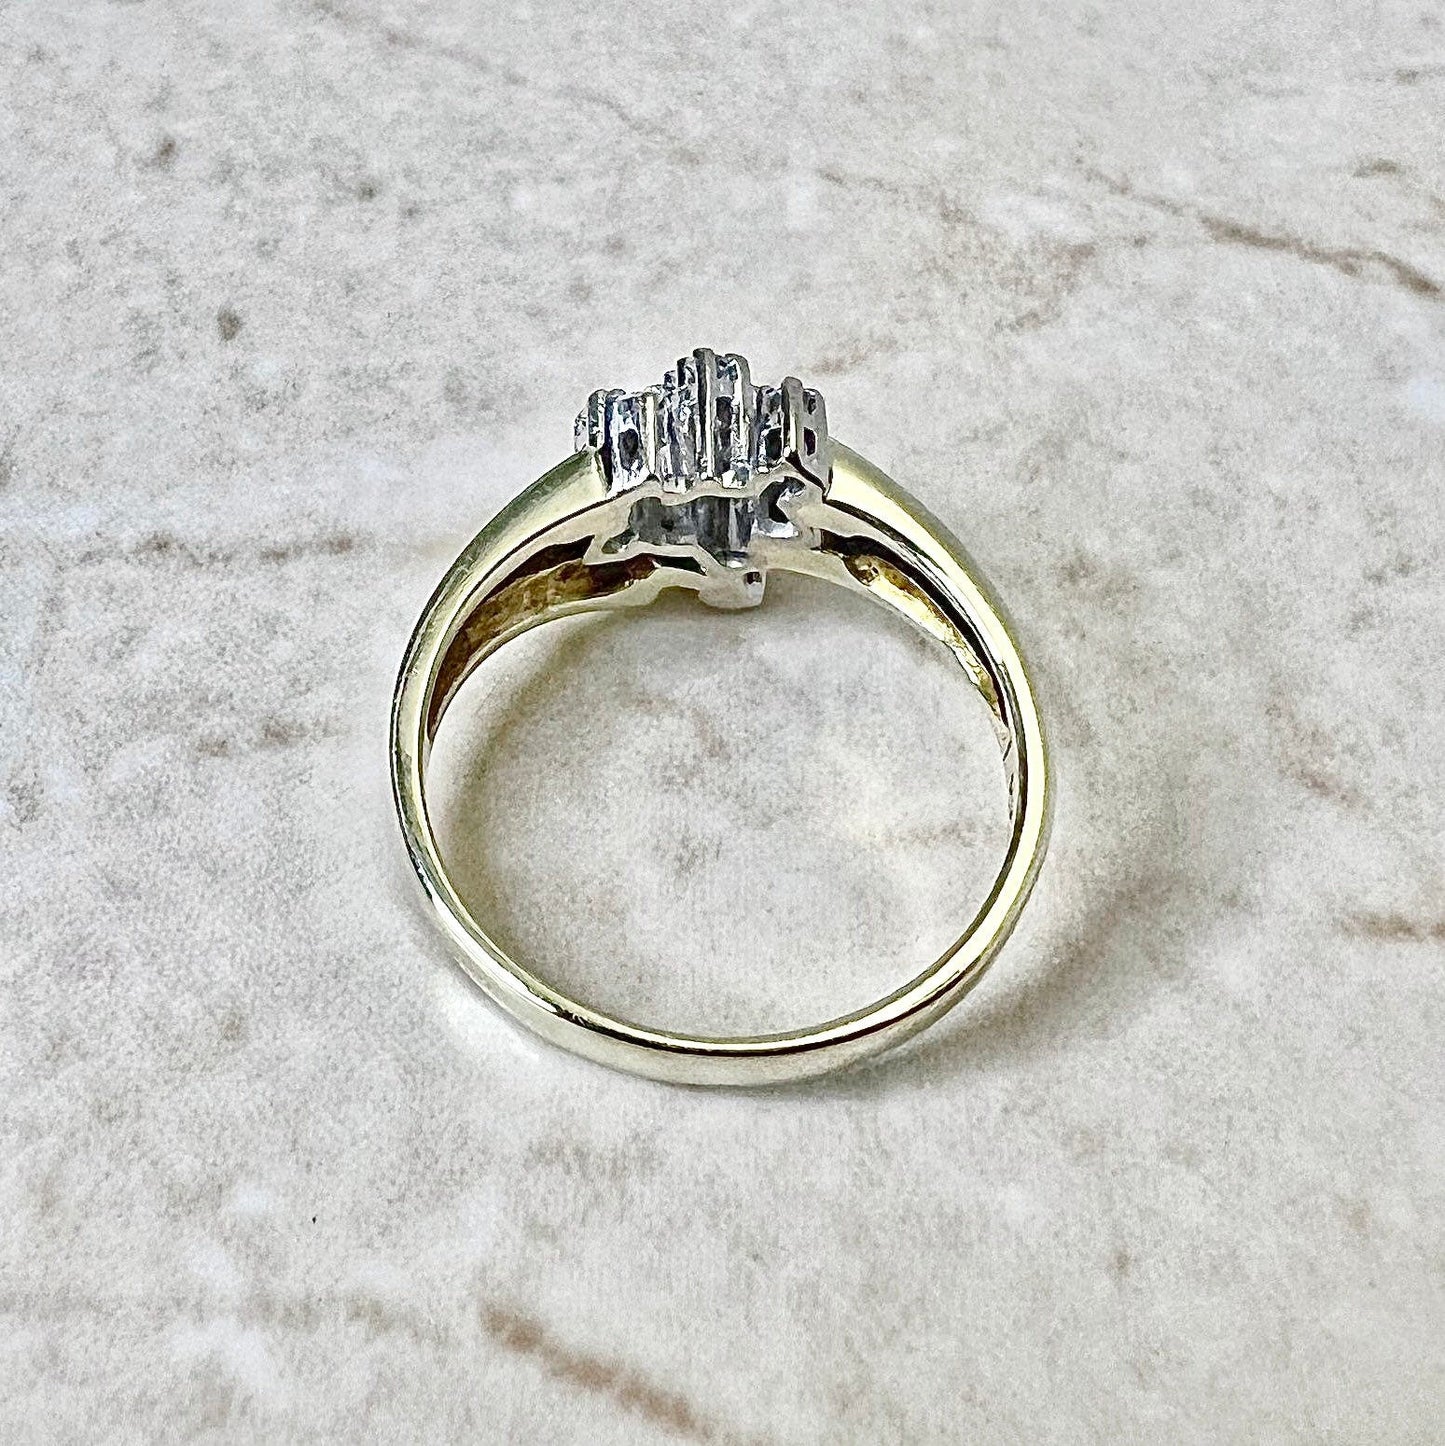 Vintage 14K Heart Diamond Ring - Yellow Gold Cocktail Ring - April Birthstone Gift - Promise Ring - Anniversary Ring - Valentine’s Day Gifts